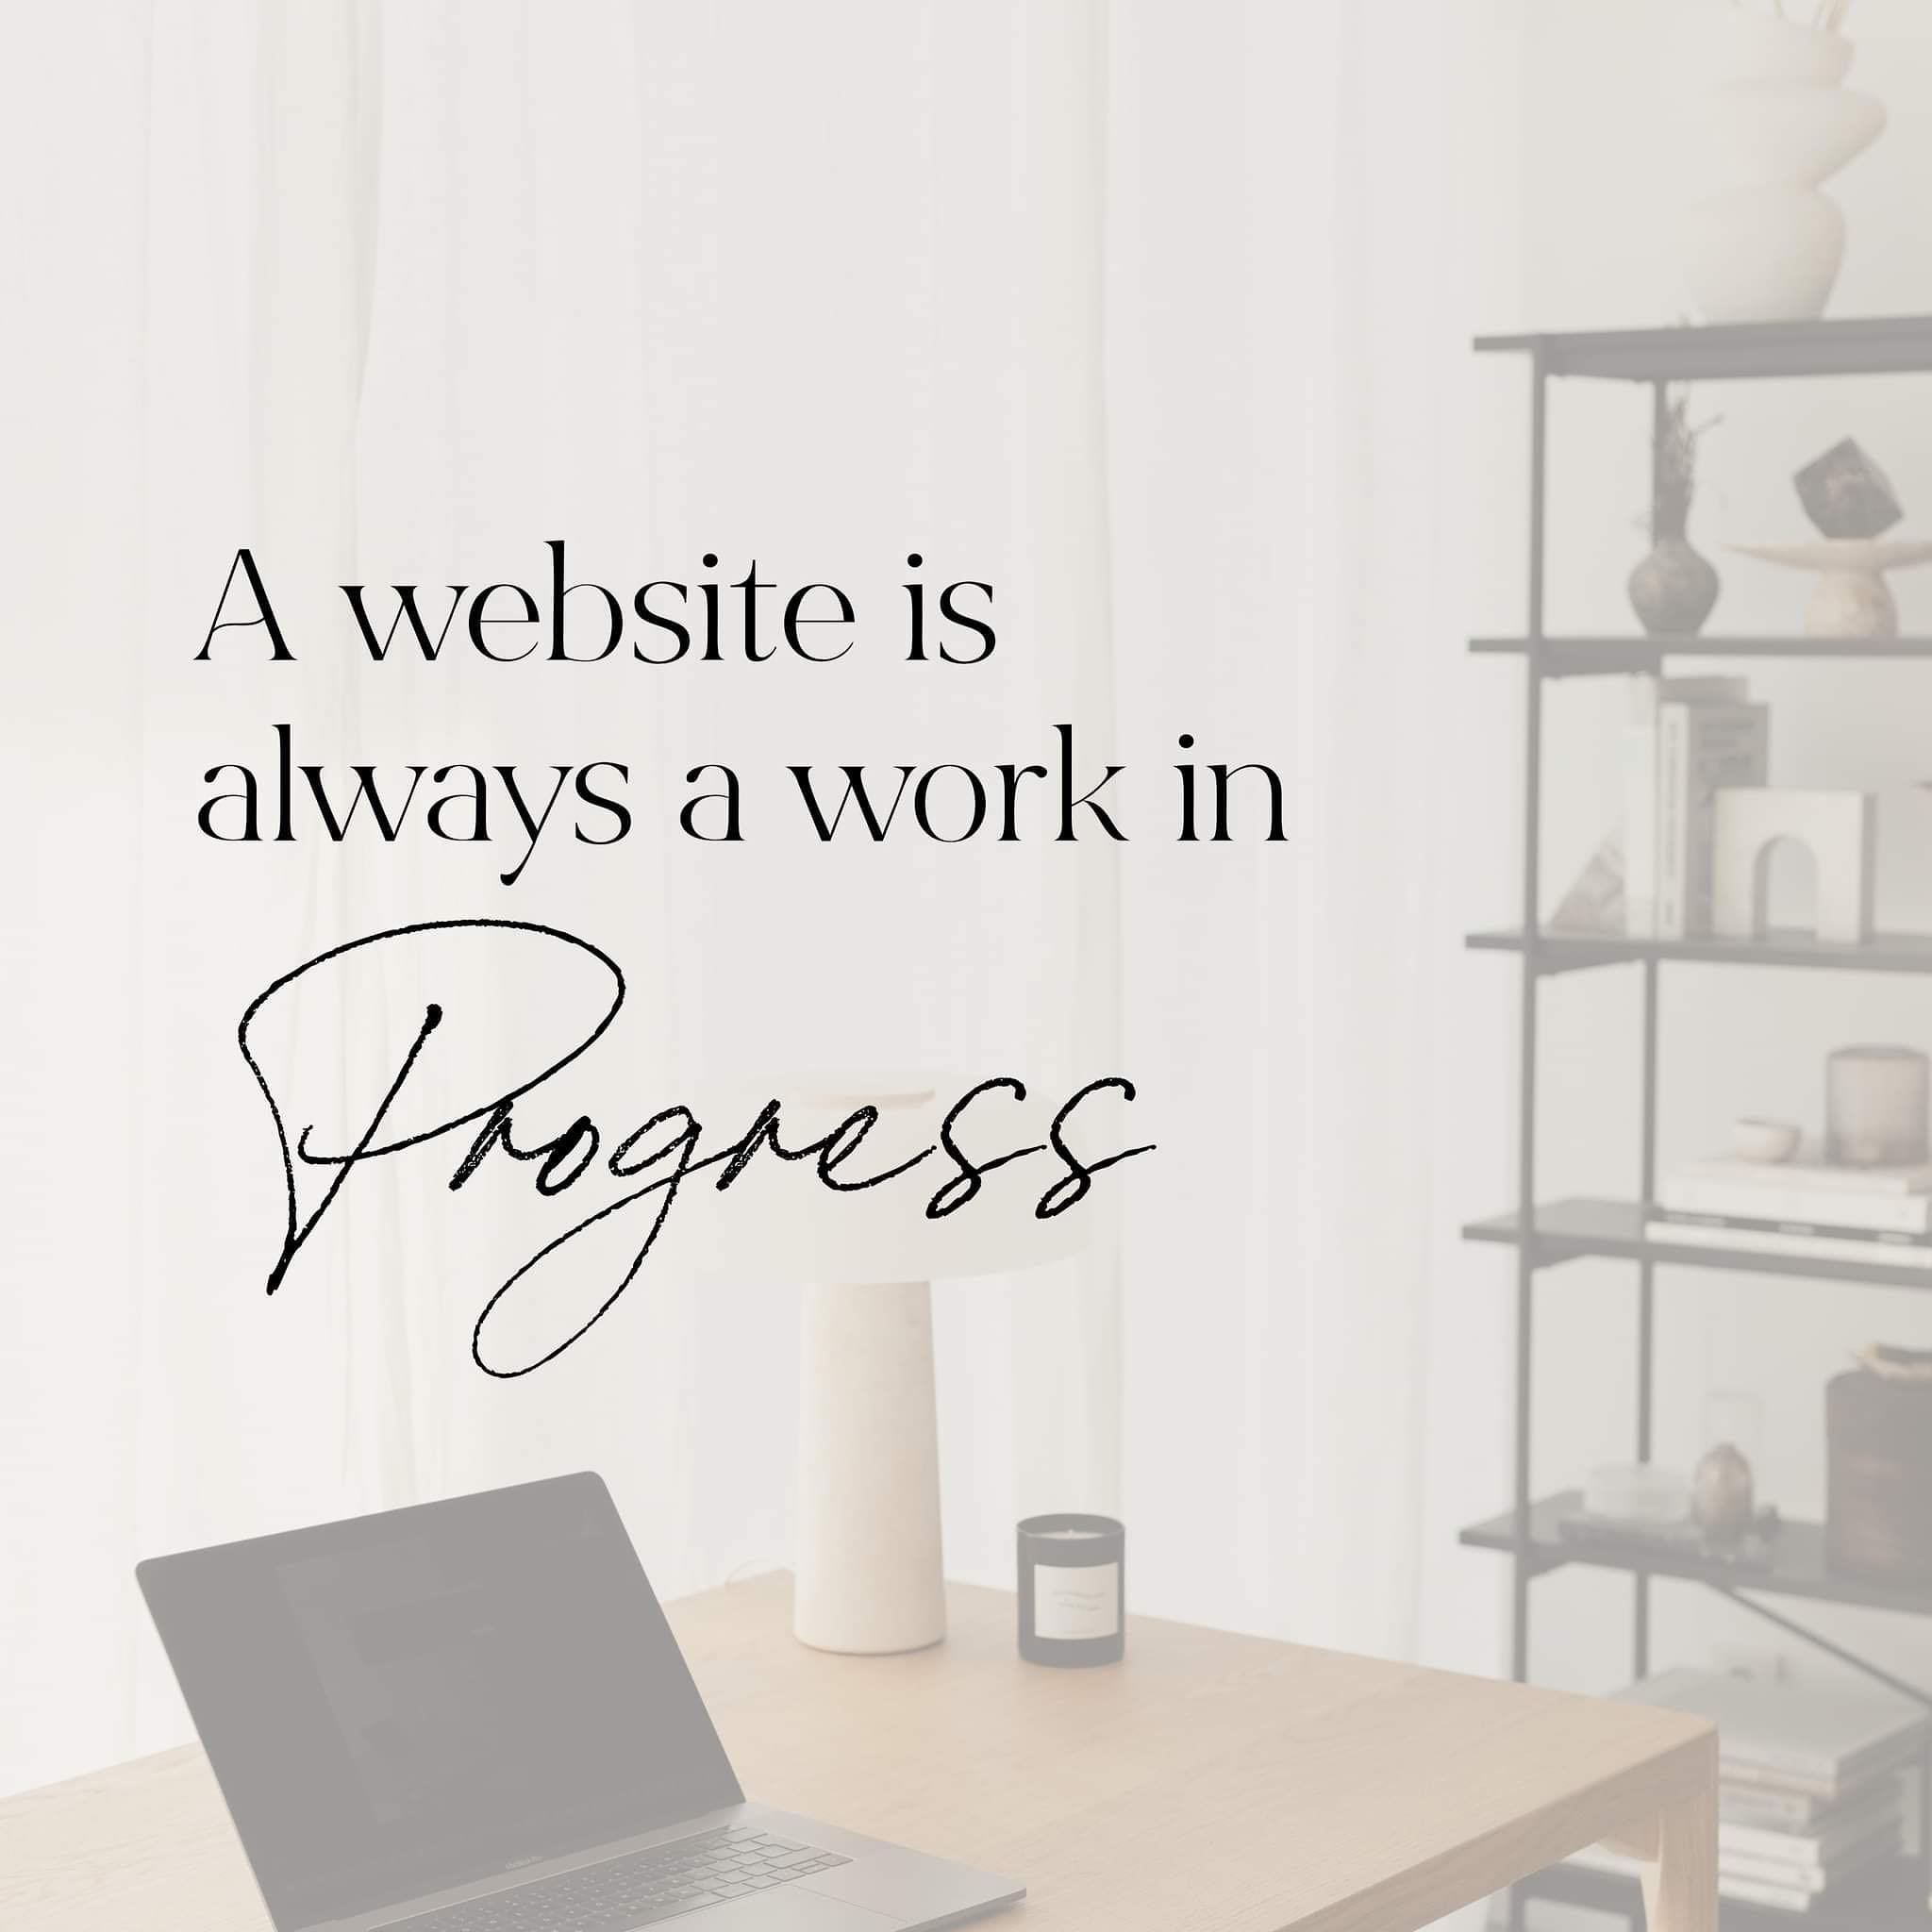 It is no surprise that a website is always a work in progress. 

Similar to a living being, a website is constantly evolving, changing, and adapting, injecting new elements and ideas as time goes by. 

👉 With billions of websites occupying the onlin